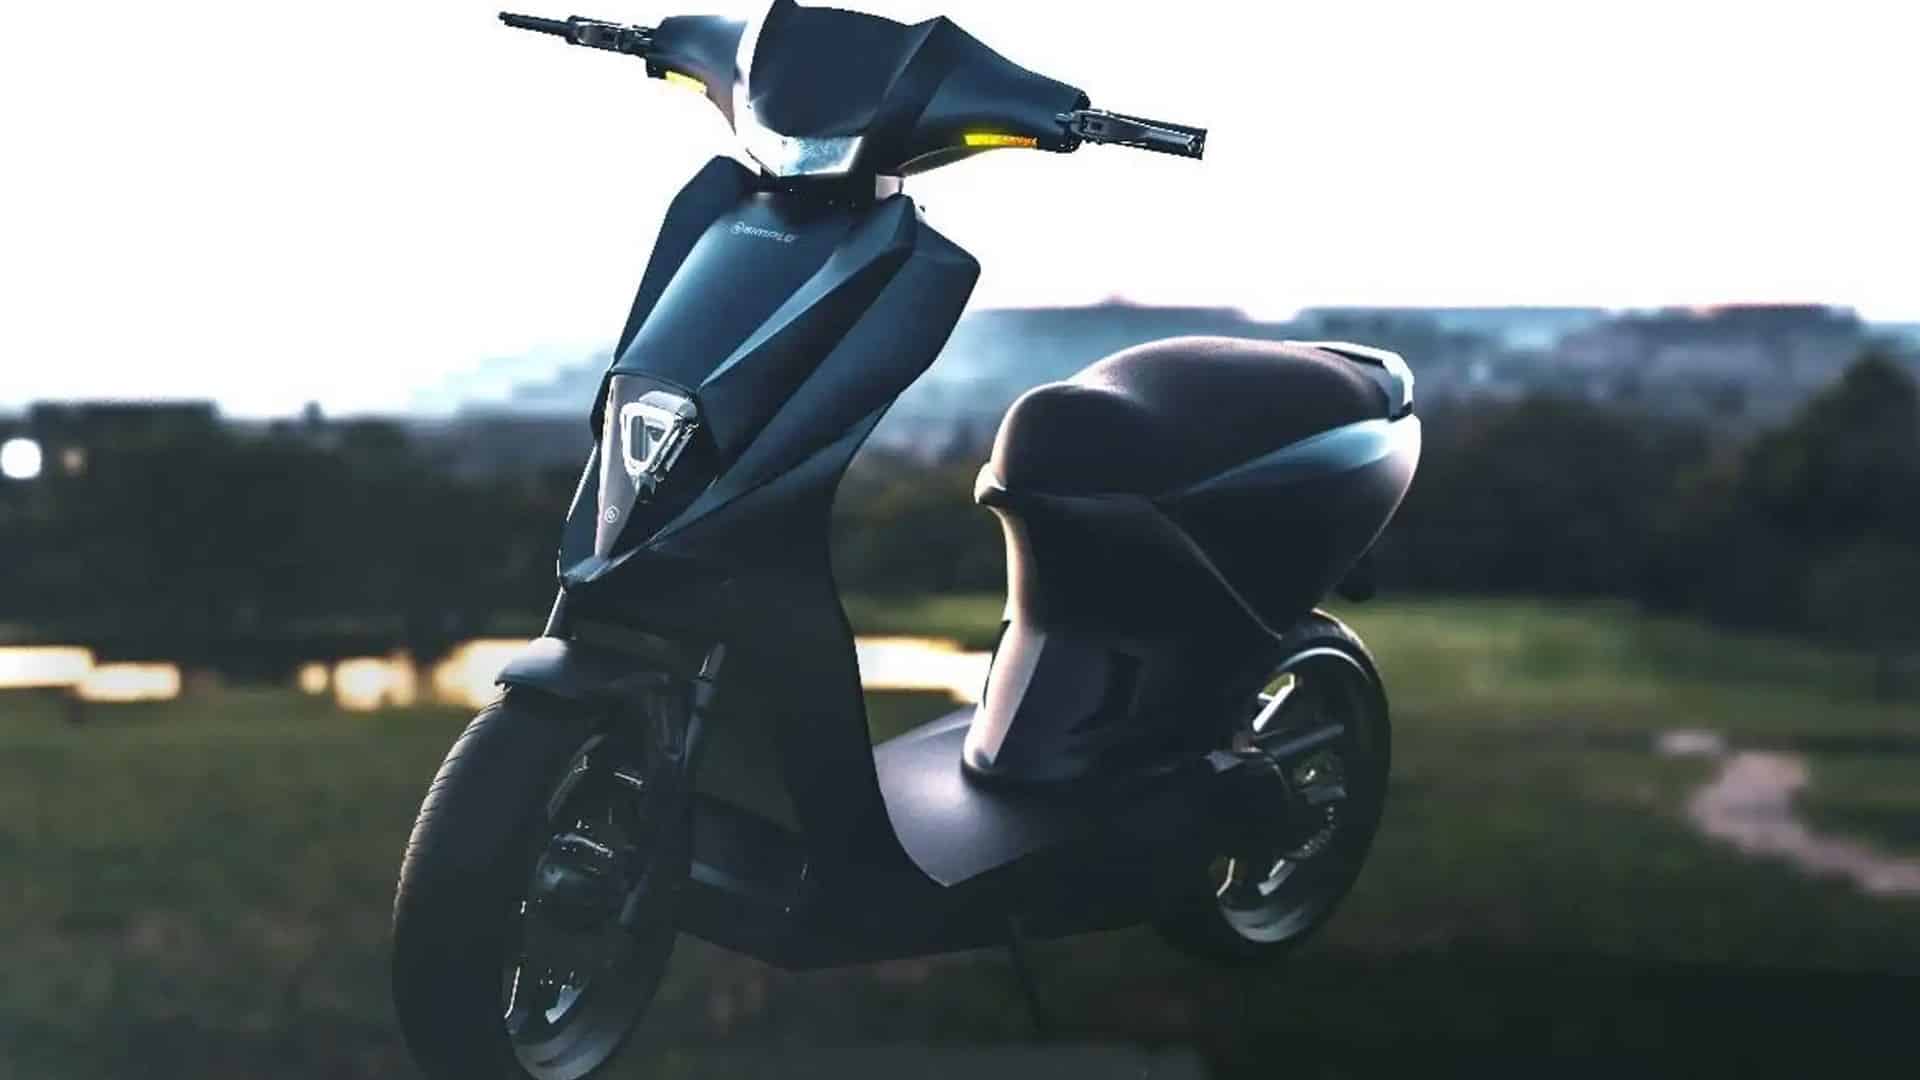 Simple Energy to start deliveries of its maiden e-scooter 'Simple One' from June